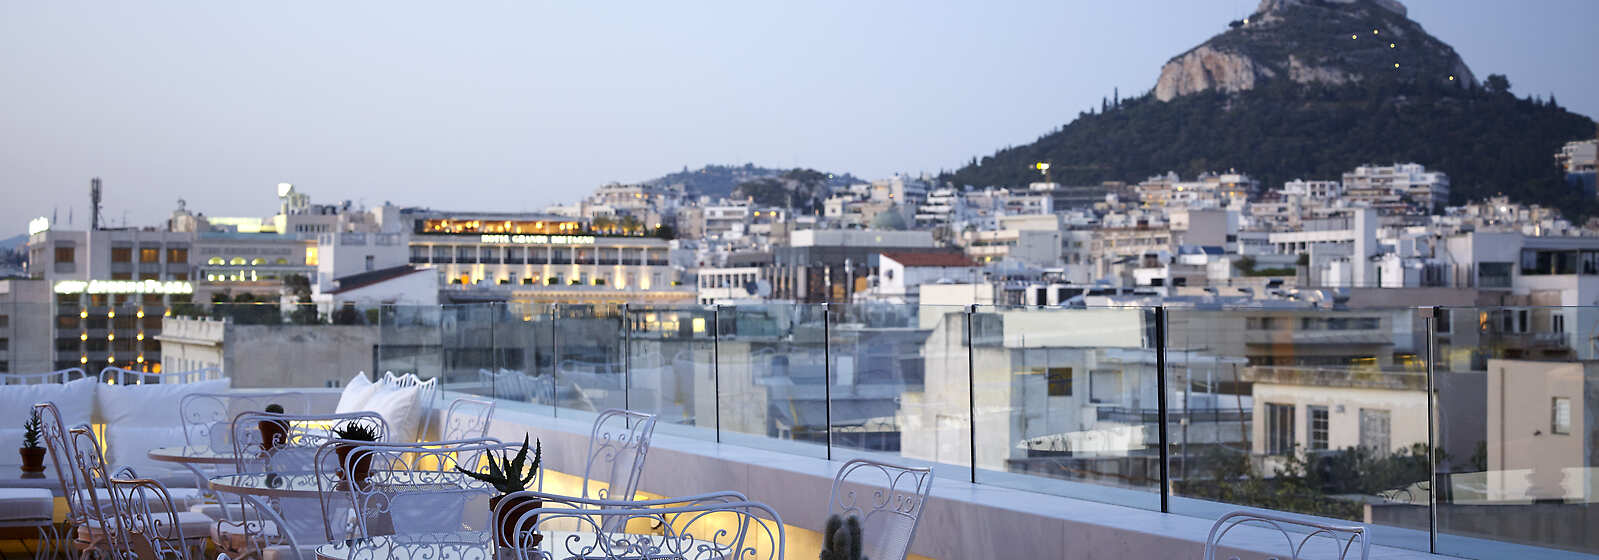 NEW Hotel's Art Lounge Restaurant Rooftop view to Lycabettus Hill